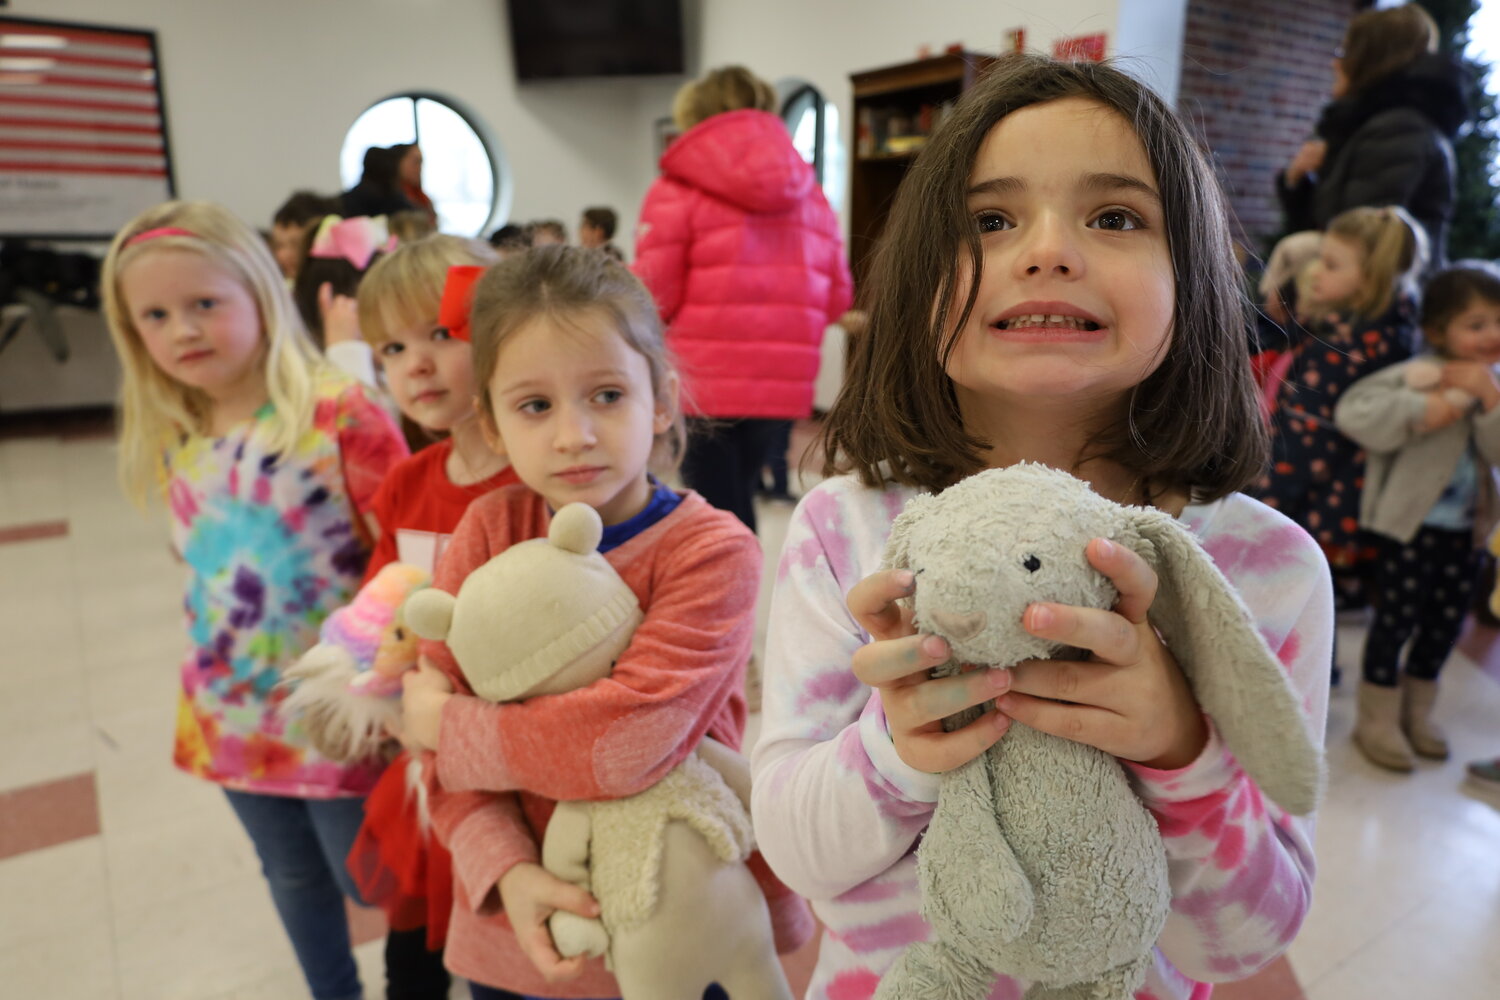 Wilson Elementary School students were excited to pay a visit to the Teddy Bear Clinic at the John A. Anderson Recreation Center.